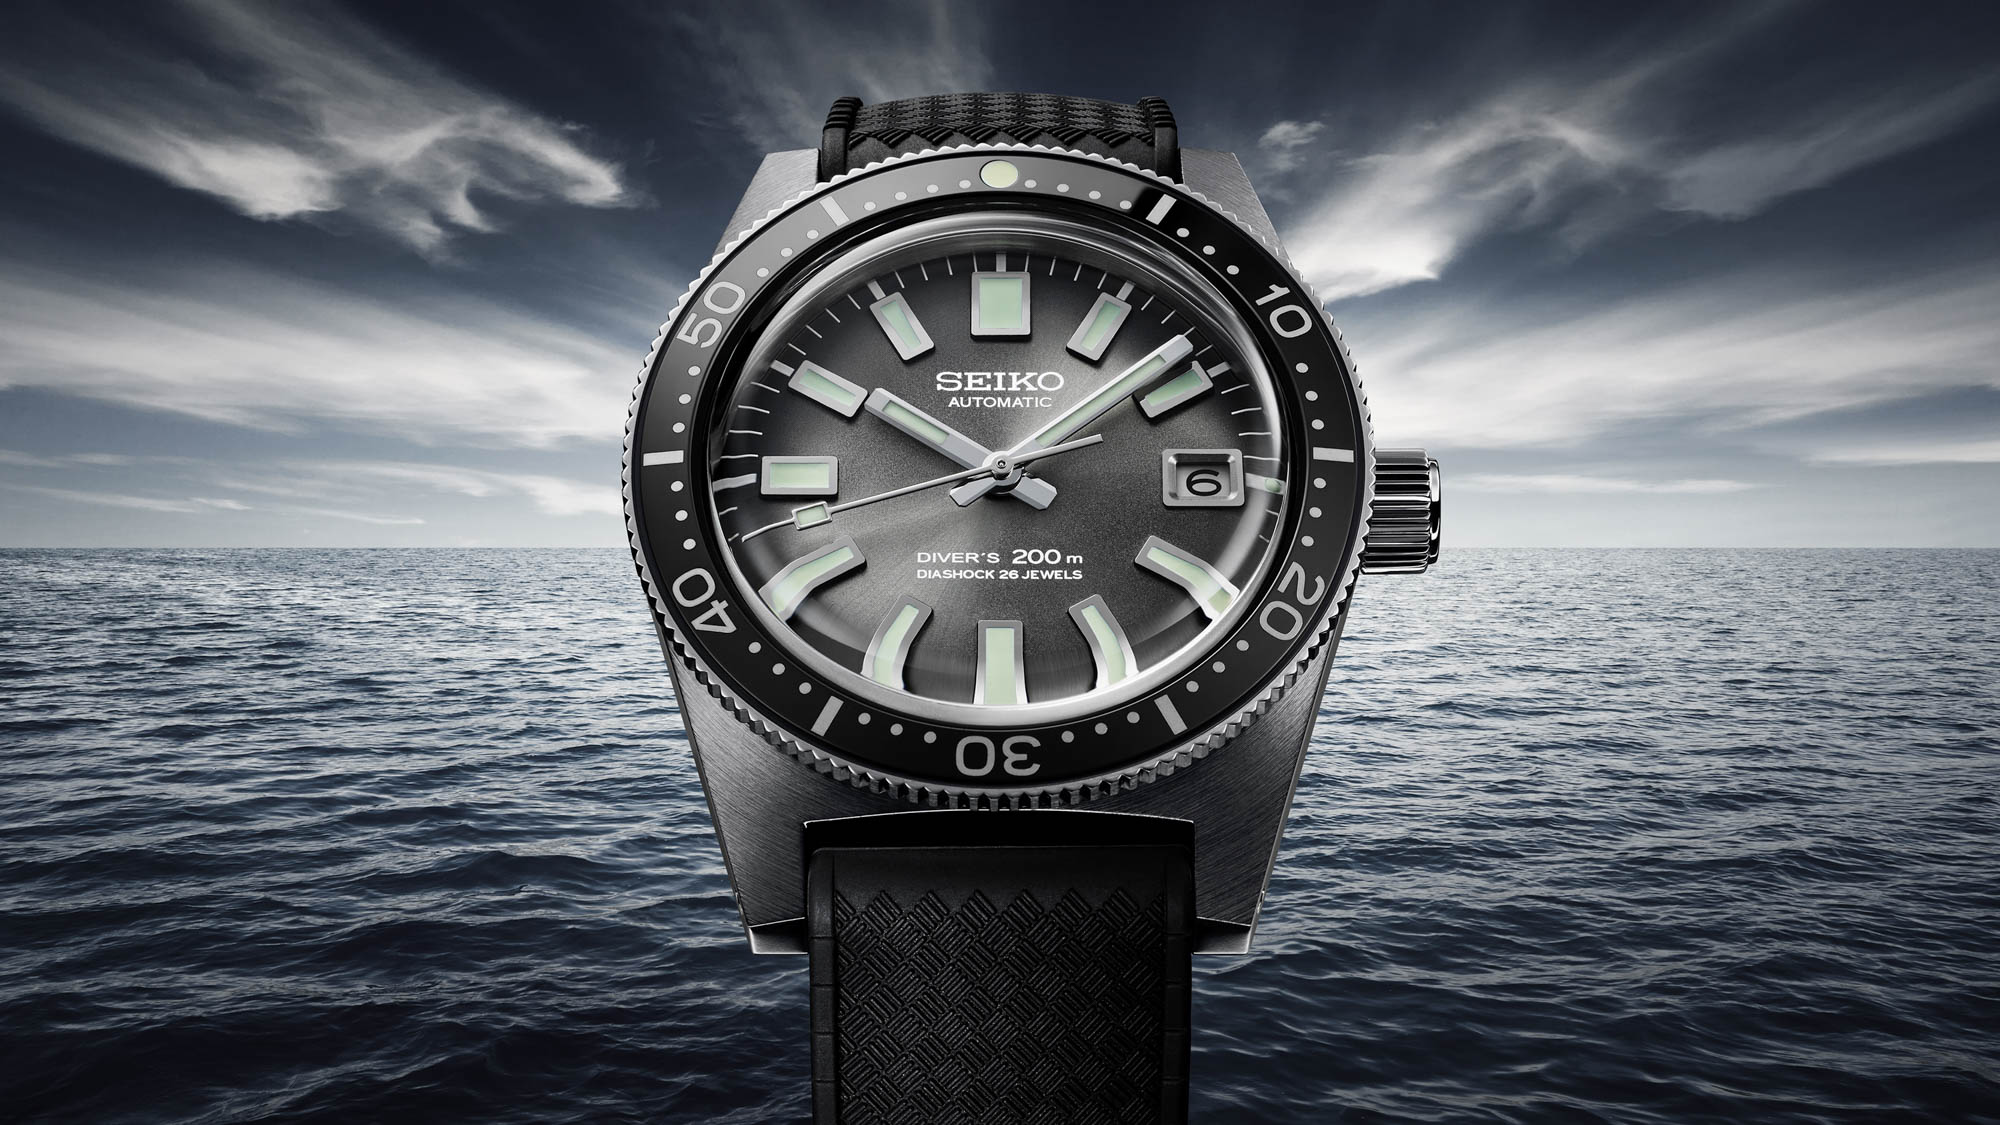 New Release: Seiko Prospex 1965 Diver's Re-Creation Limited-Edition SJE093  Watch